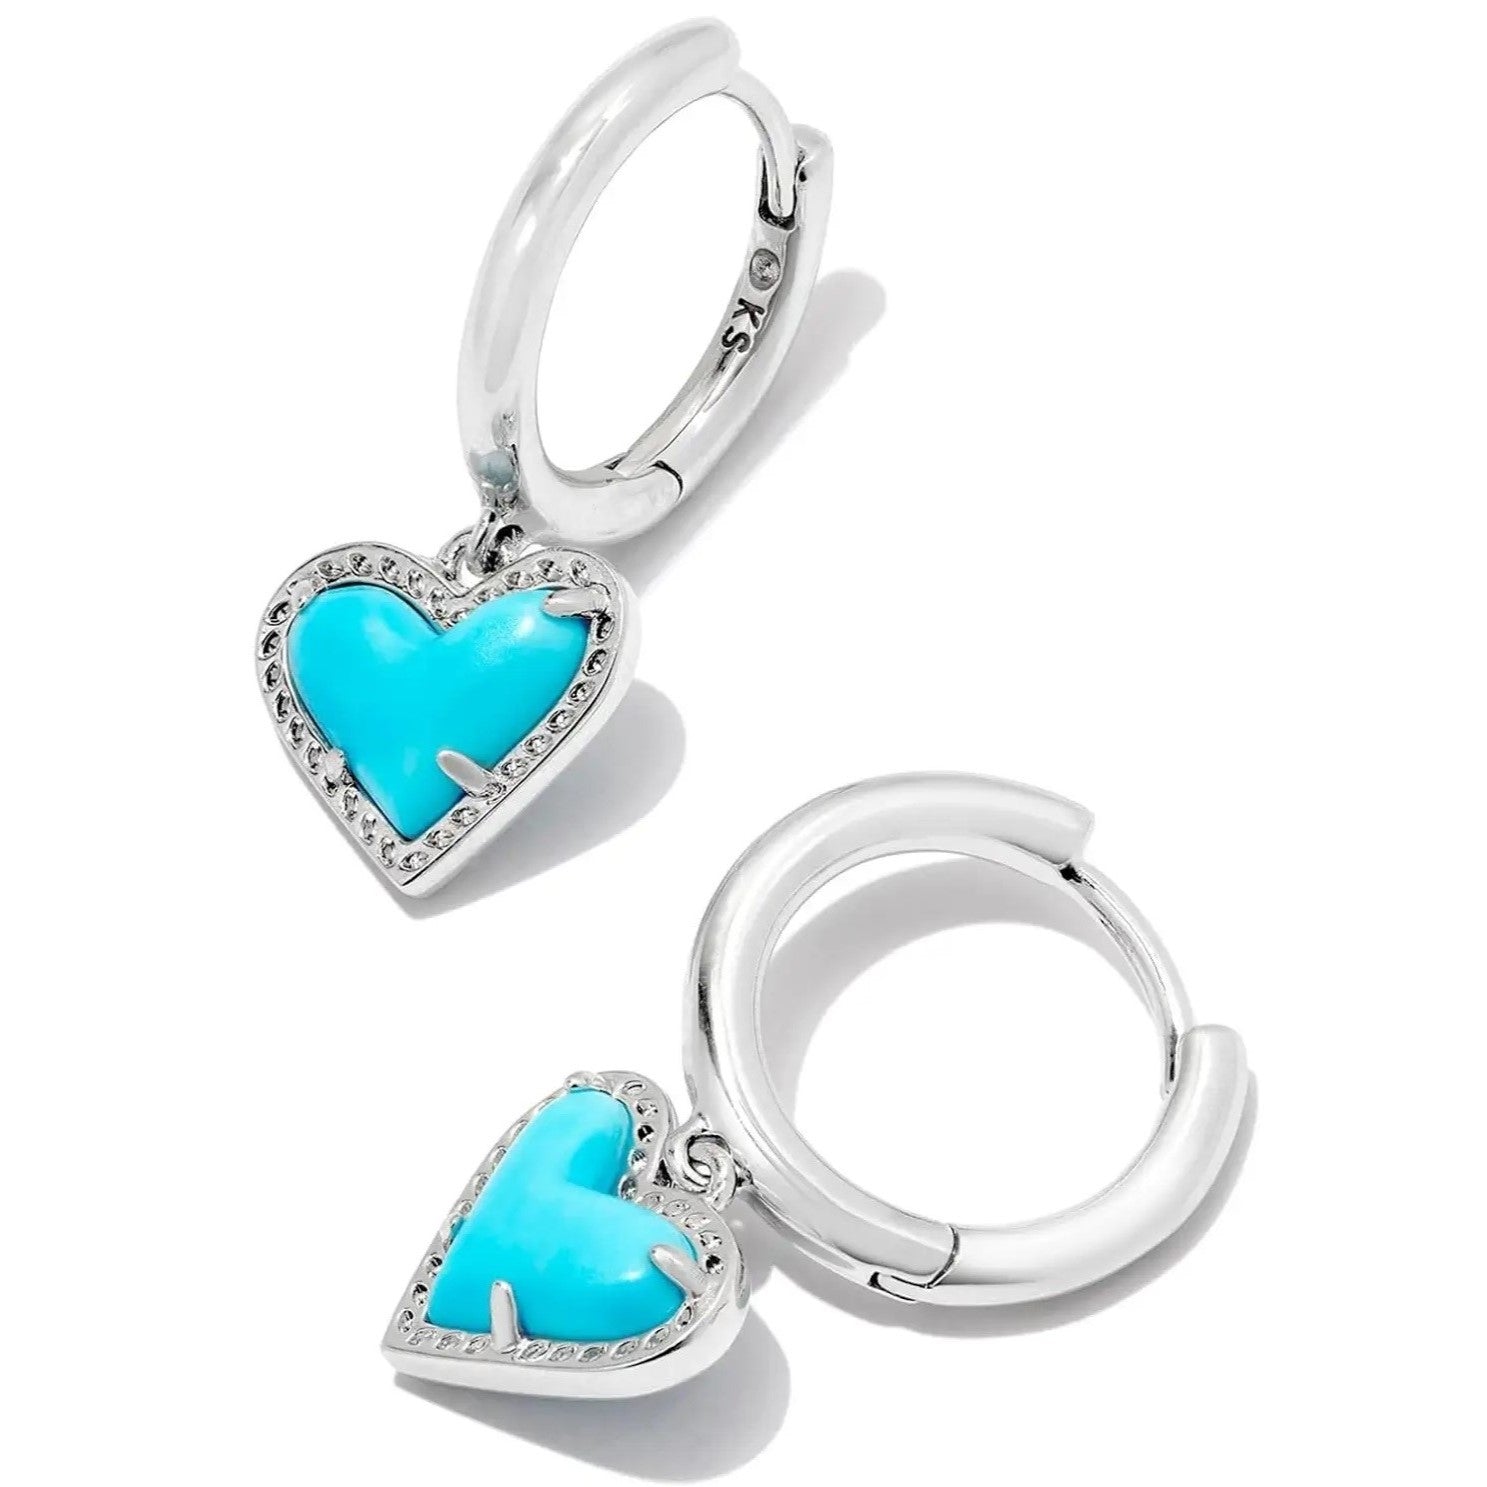 Kendra Scott | Ari Heart Silver Huggie Earrings in Variegated Turquoise Magnesite - Giddy Up Glamour Boutique